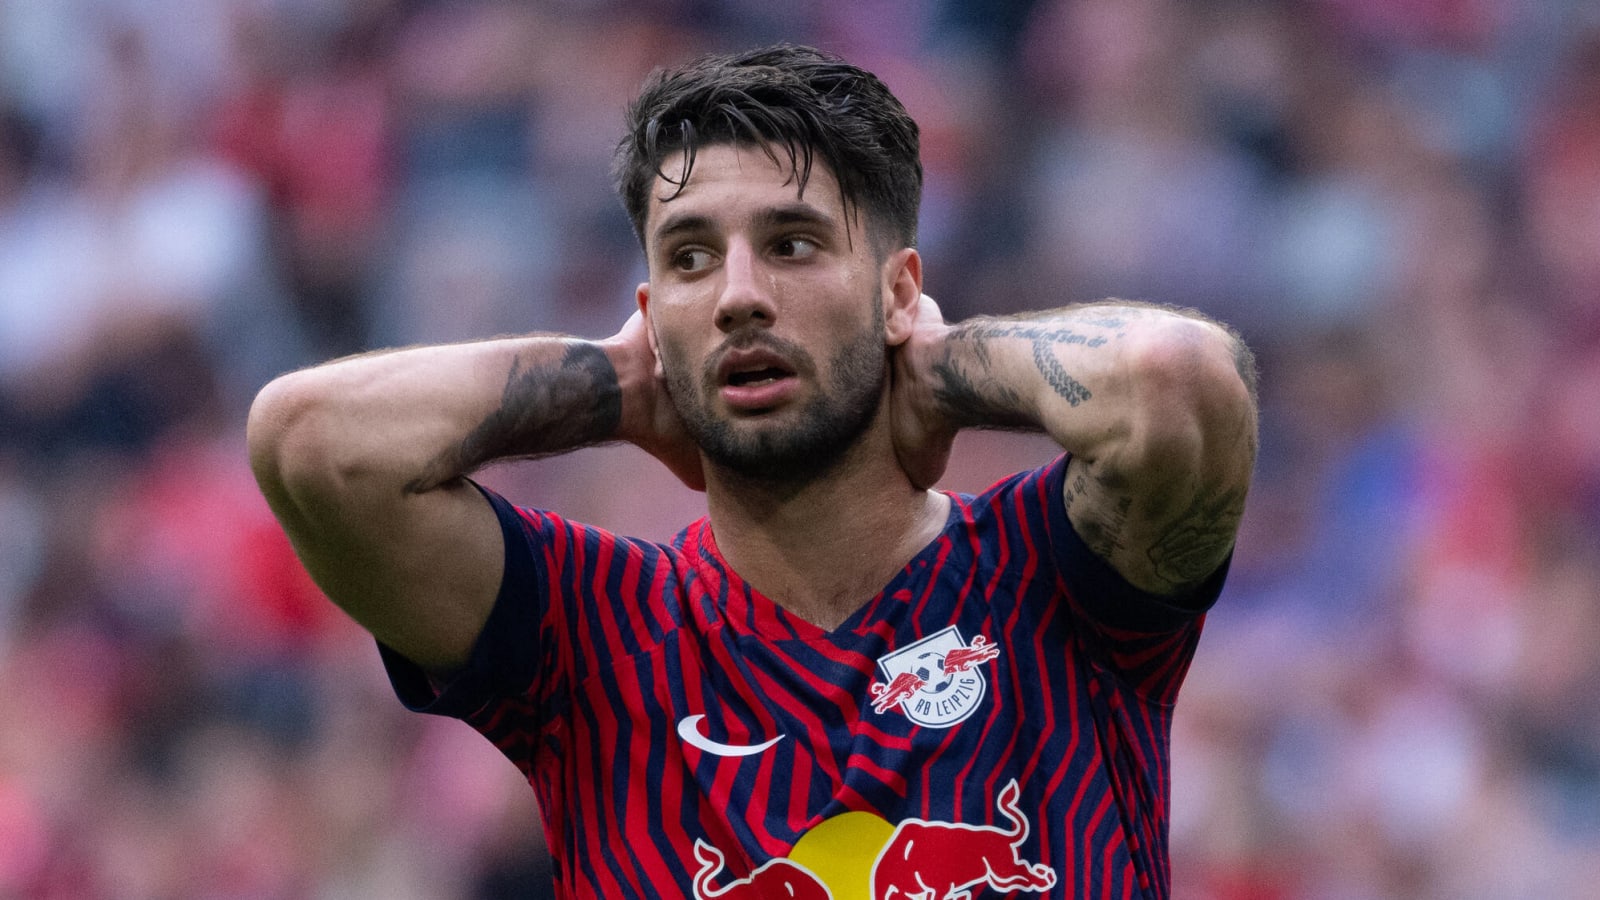 Arsenal wants two RB Leipzig stars as a part of their summer rebuild